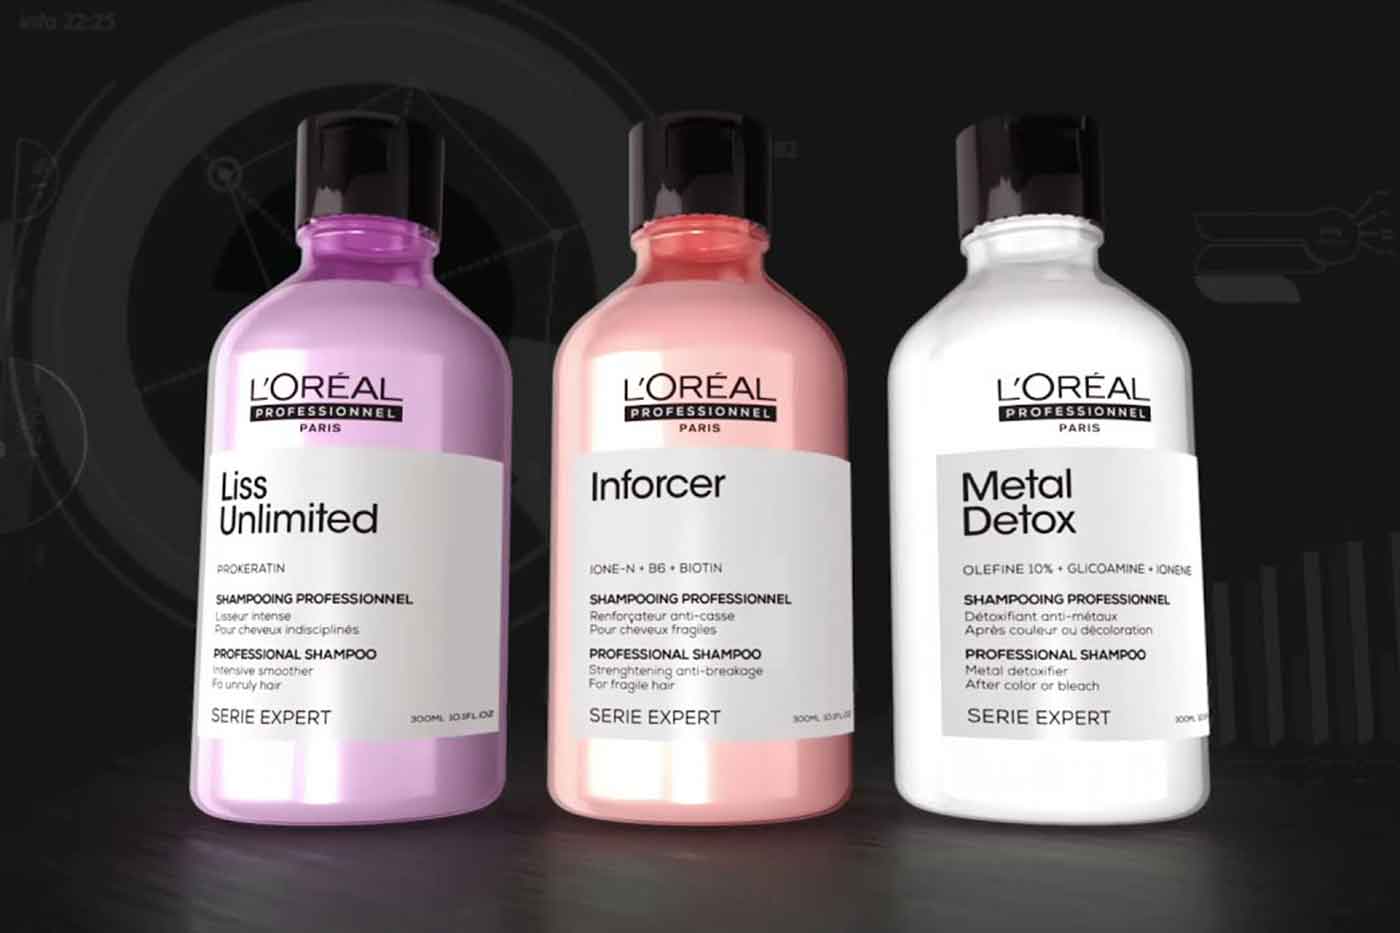 Myntra and L’Oreal Professionnel Products Division collaborate